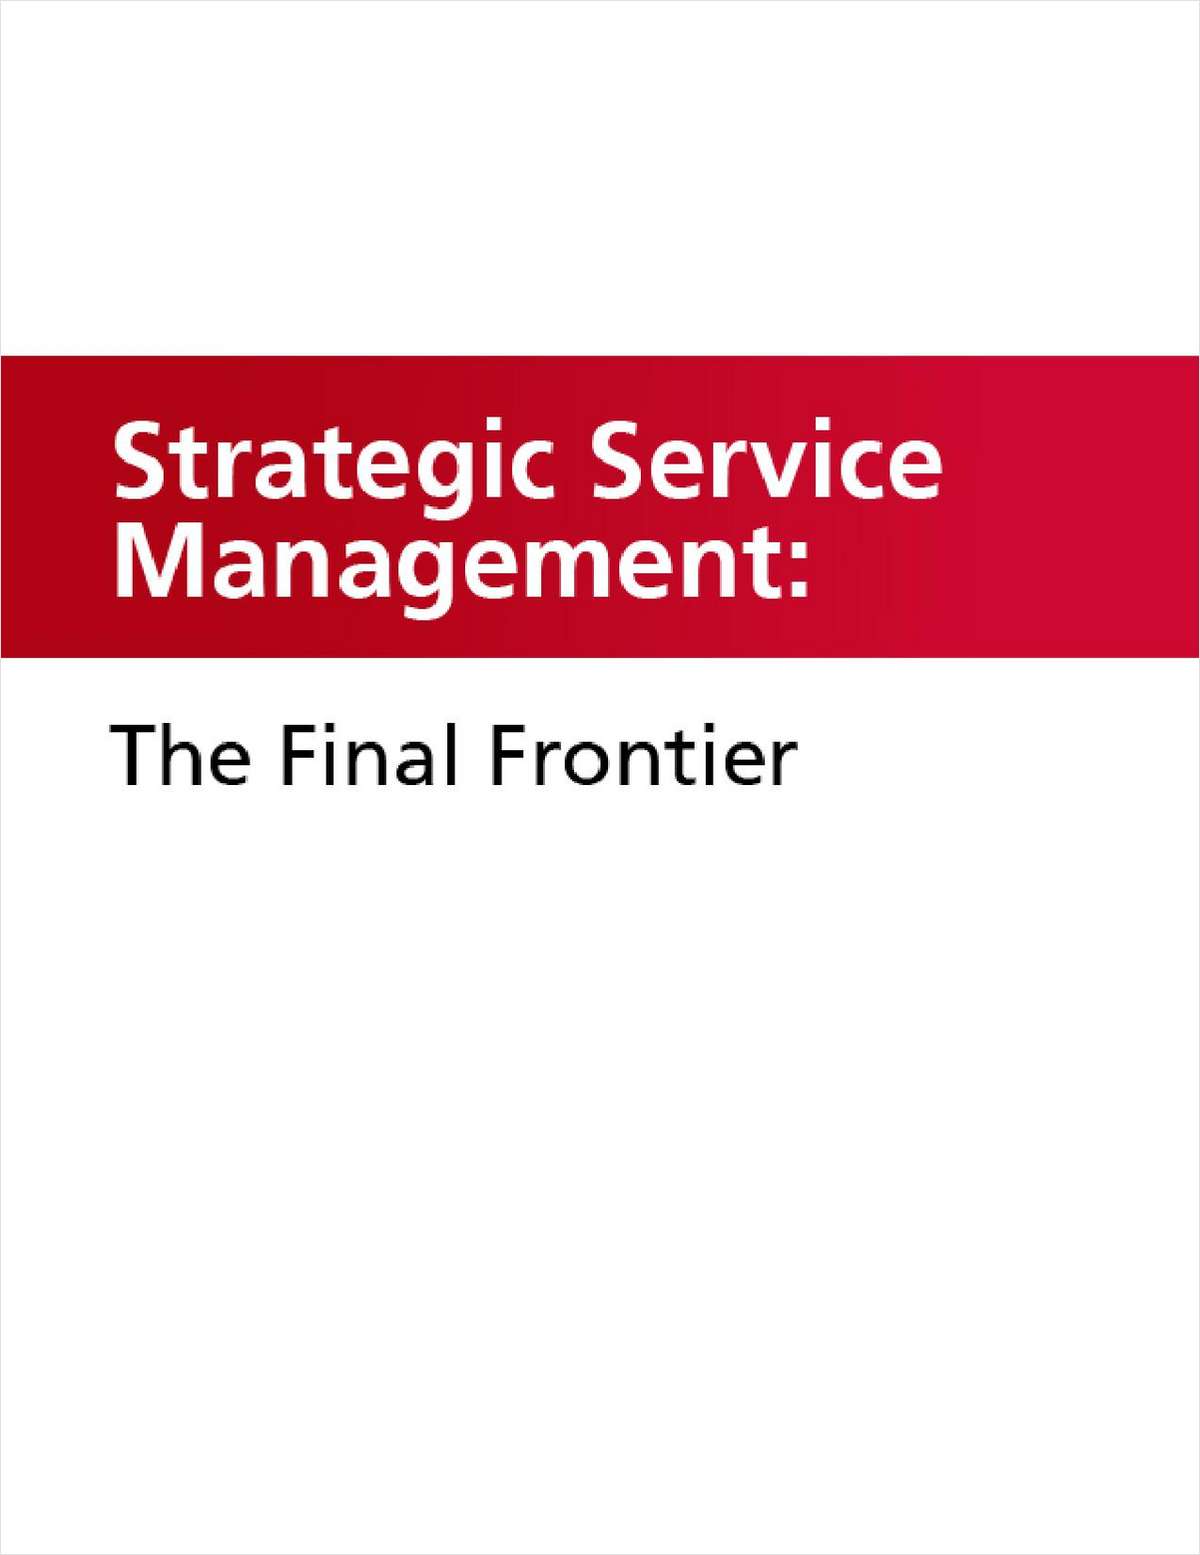 Strategic Service Management: The Final Frontier